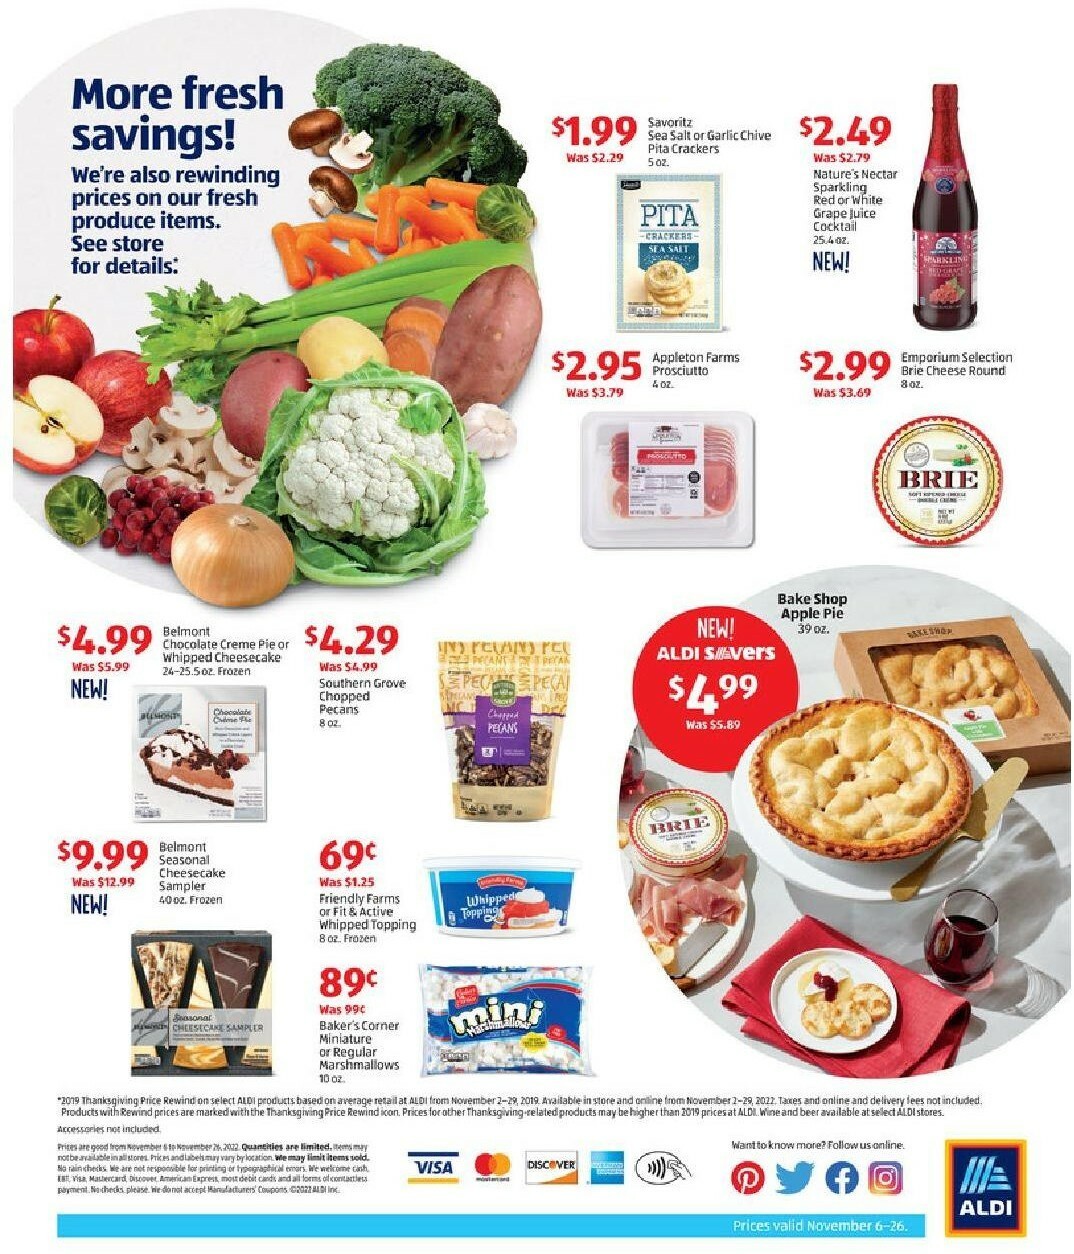 ALDI Thanksgiving Rewind Weekly Ad from November 6